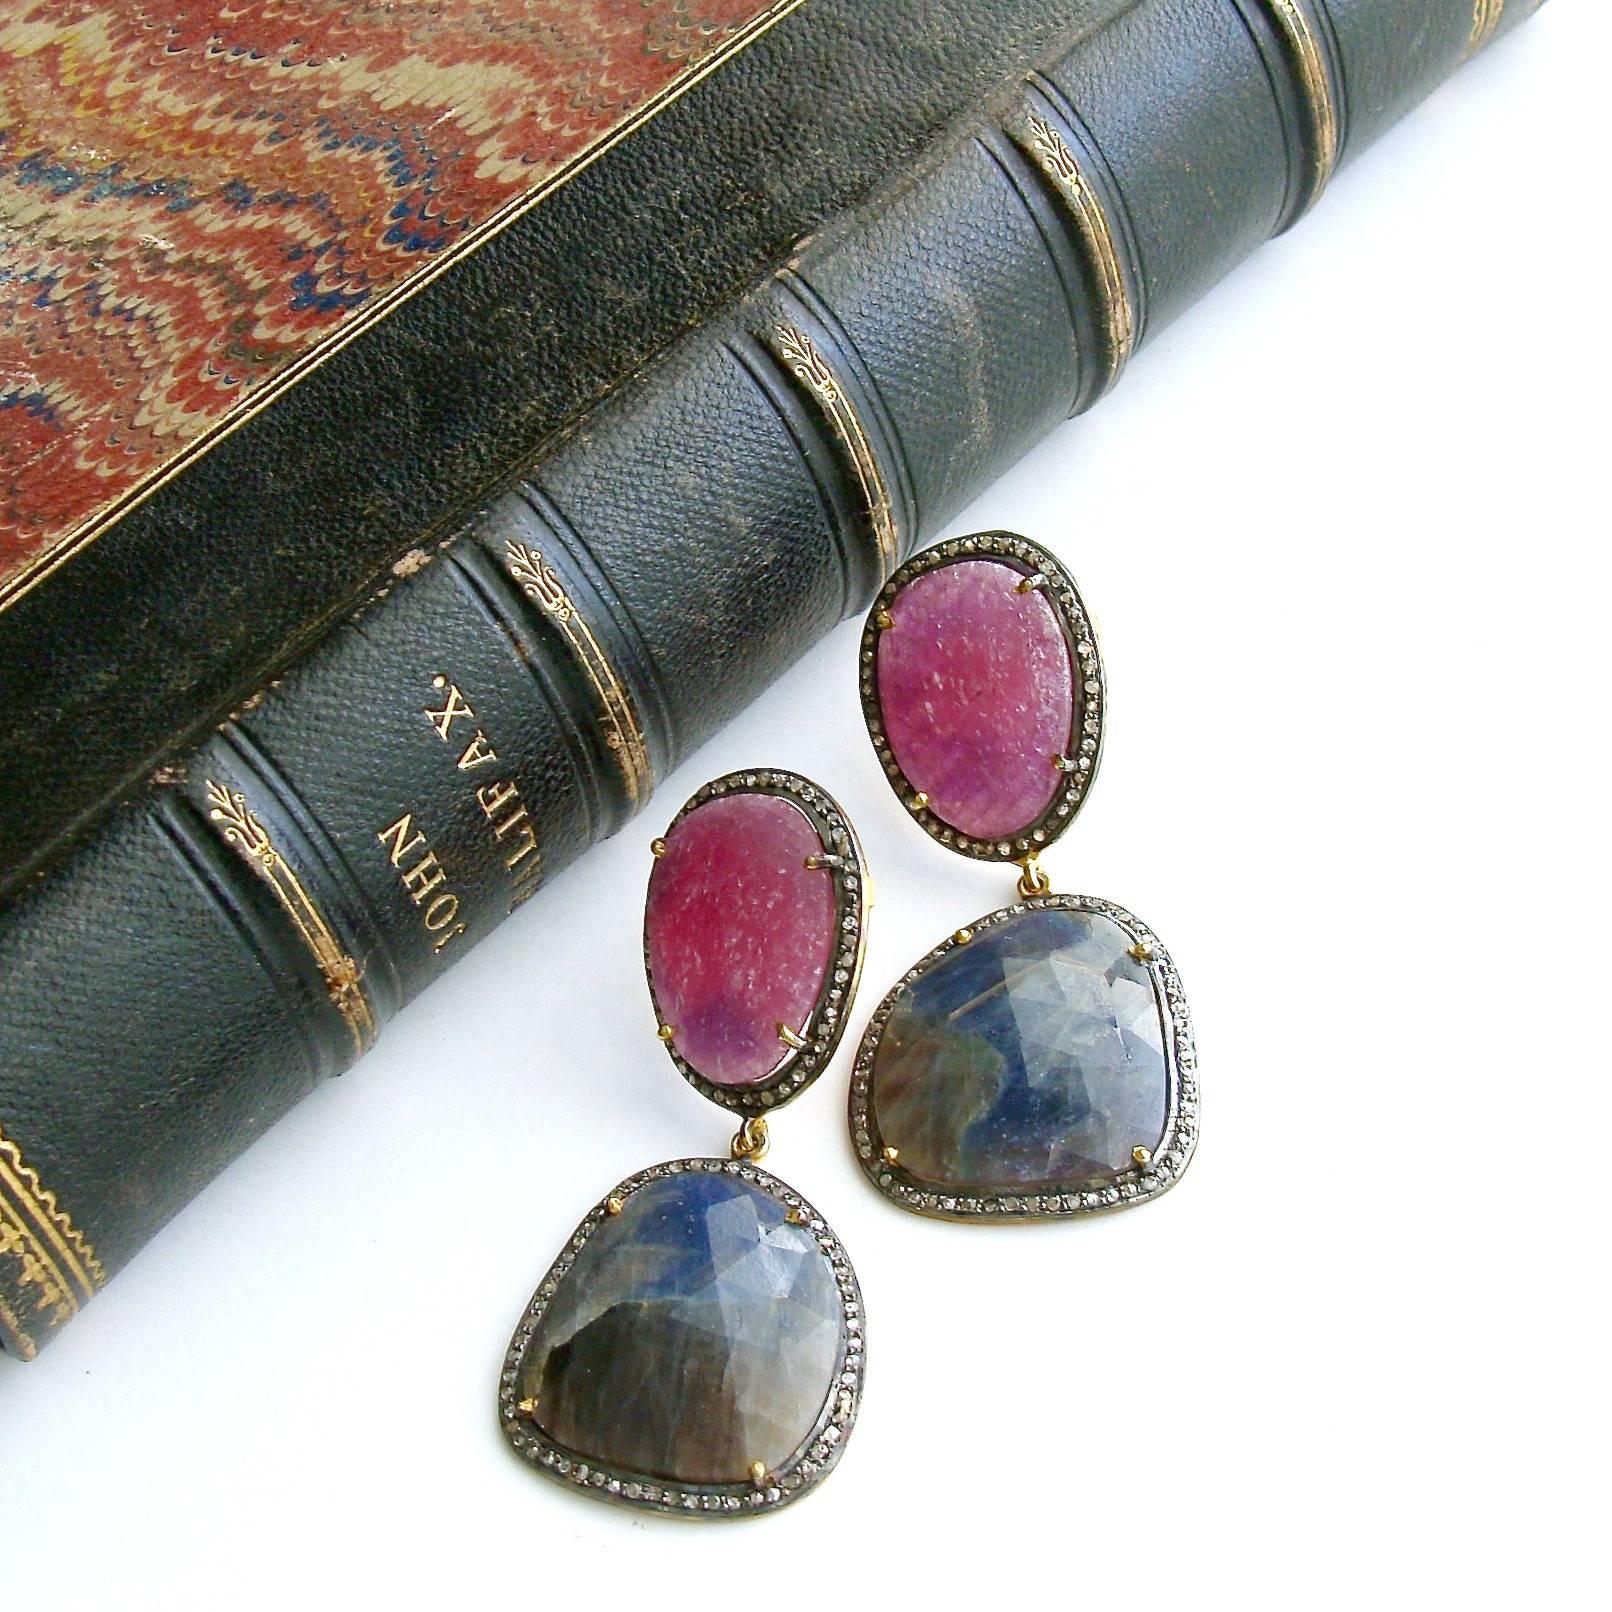 Katie Earrings.

A classic  color combination of raspberry pink and denim blue faceted sapphire slices, encircled with pave diamonds - has created a timeless design that will certainly elicit admiring glances from fashionistas everywhere.  The 